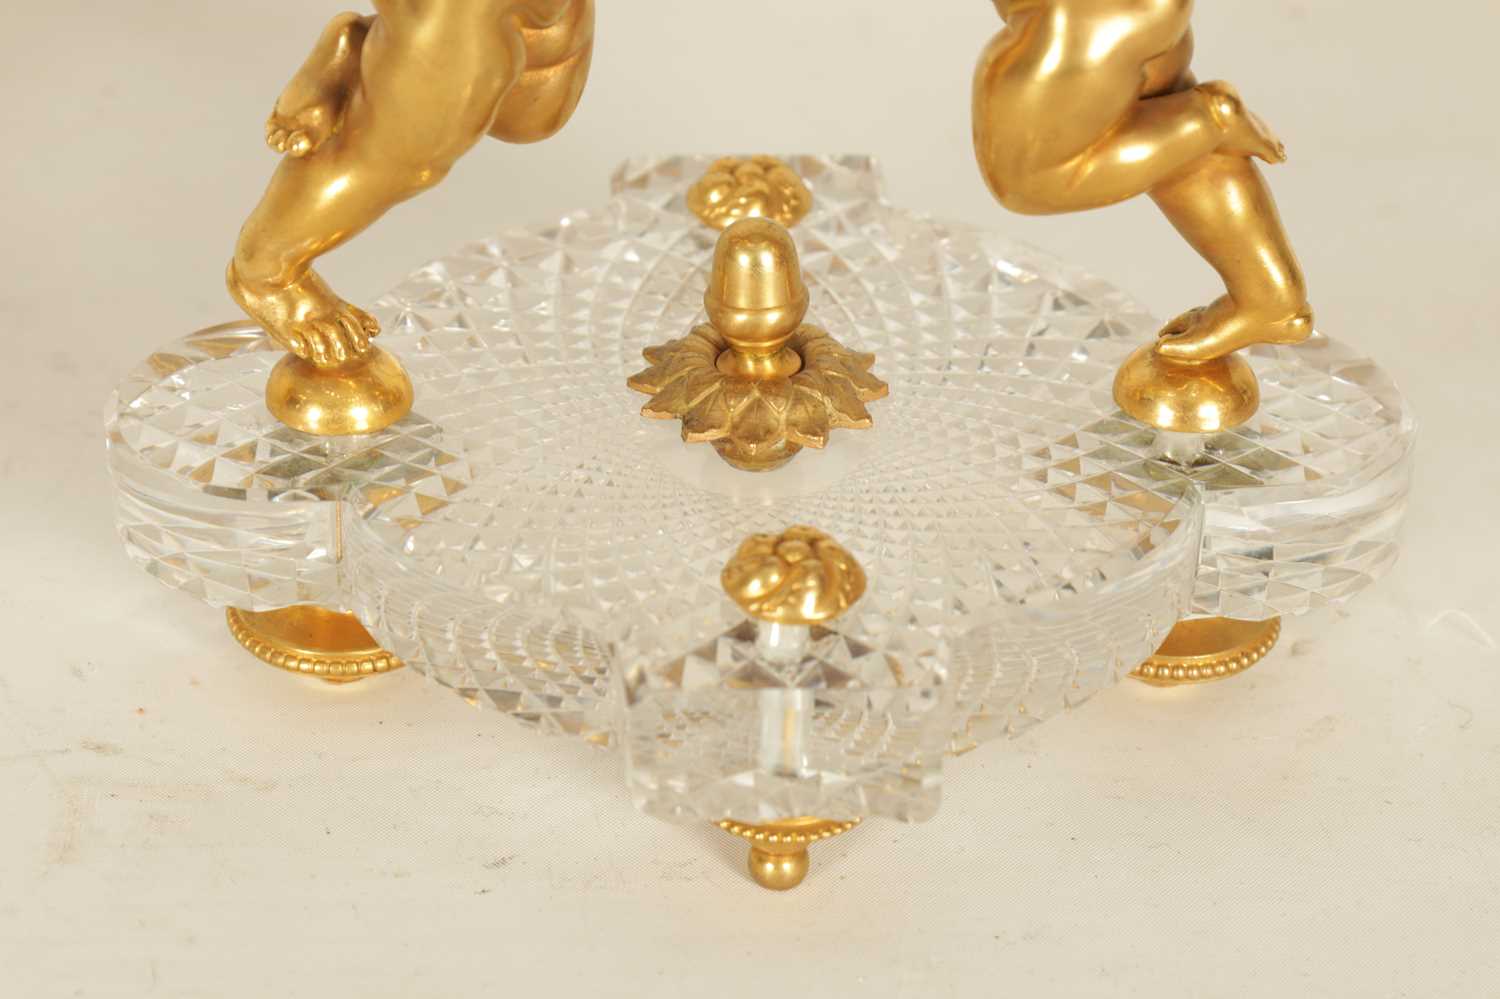 A FINE PAIR OF LATE 19TH/EARLY 20TH CENTURY BACCARAT ORMOLU AND CUT GLASS COMPORTS - Image 4 of 10